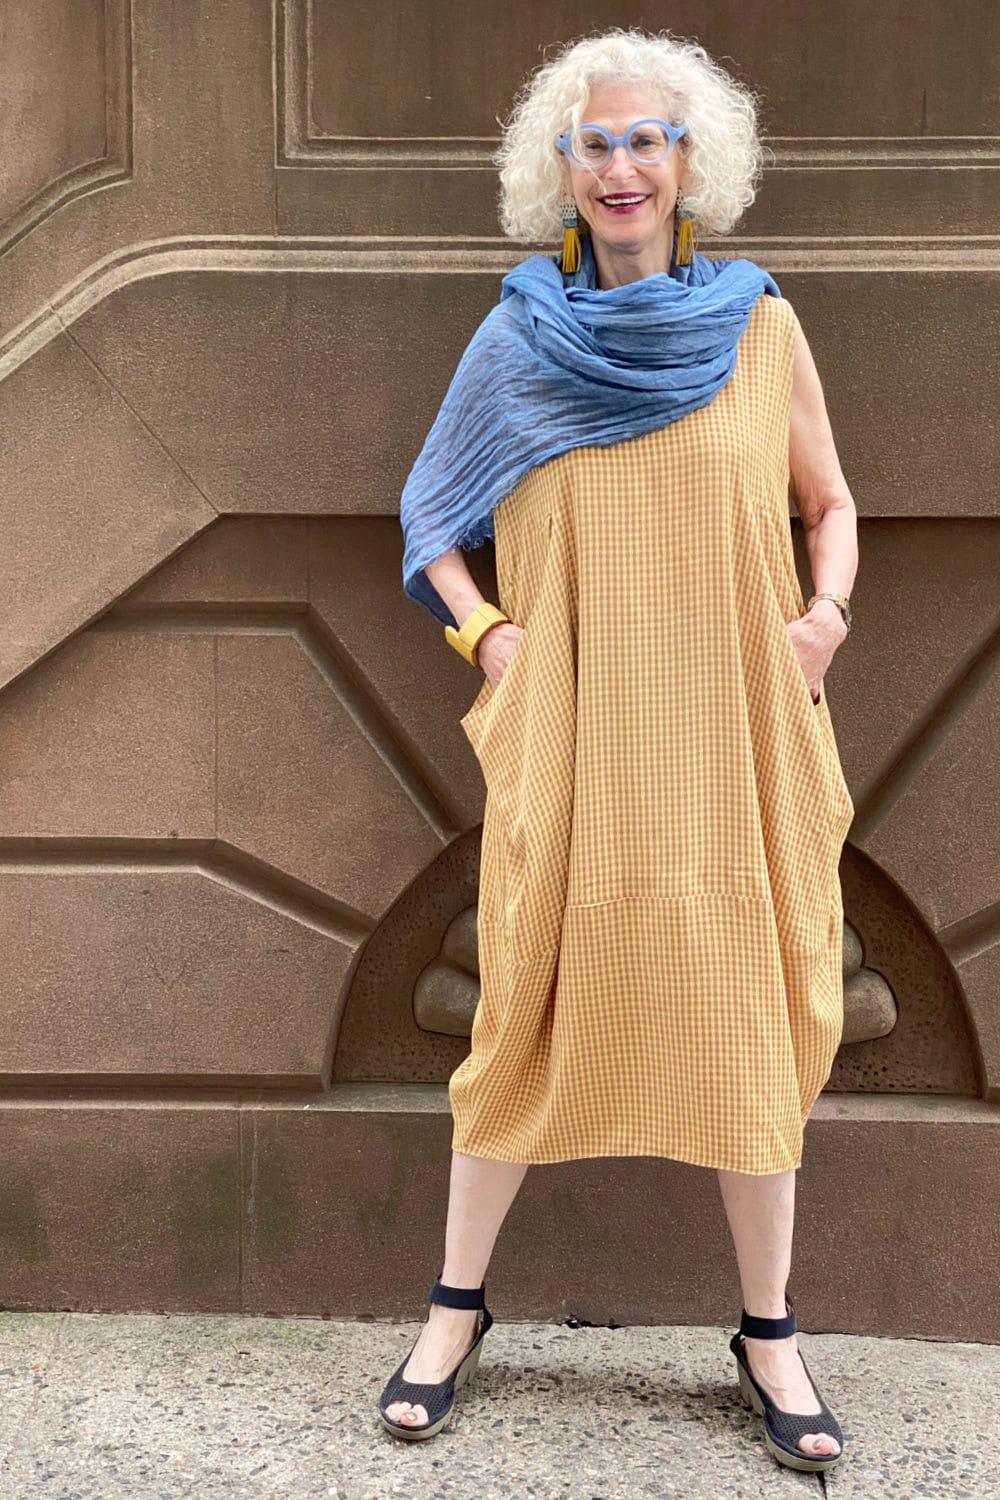 Happy woman standing on the street wearing a summer dress with  a slight bubble shapem tank with two large front pockets. The fabric is a baby check pattern. She is also wearing a blue cotton scarf, blue and yellow tassel earrings with a yellow wooden bracelet.